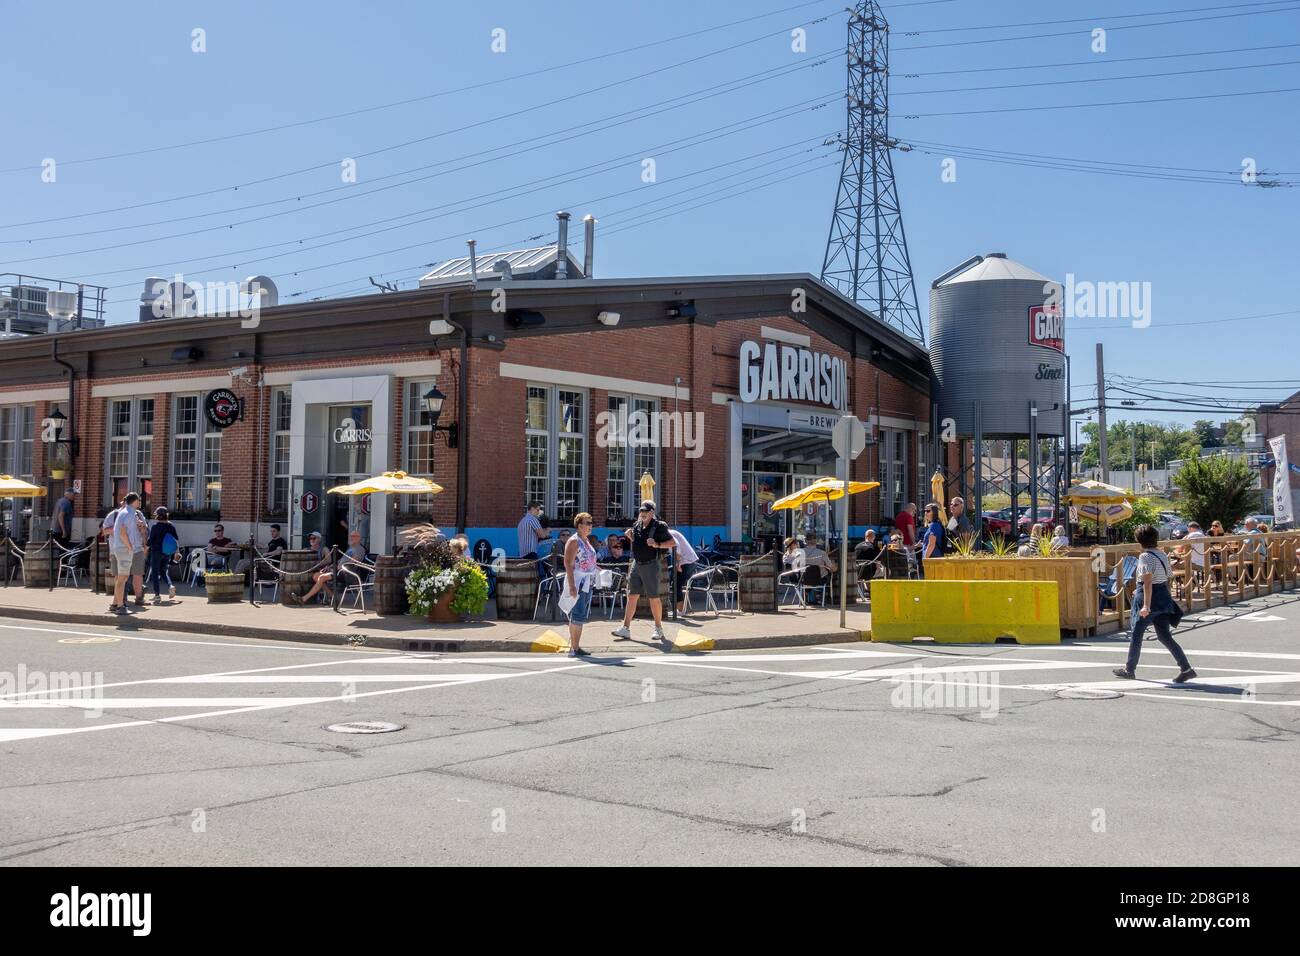 Garrison Brewery Entrance A Craft Beer Brewery At The Cruise Ship Farmers Market In Seaport Halifax Nova Scotia Canada Stock Photo